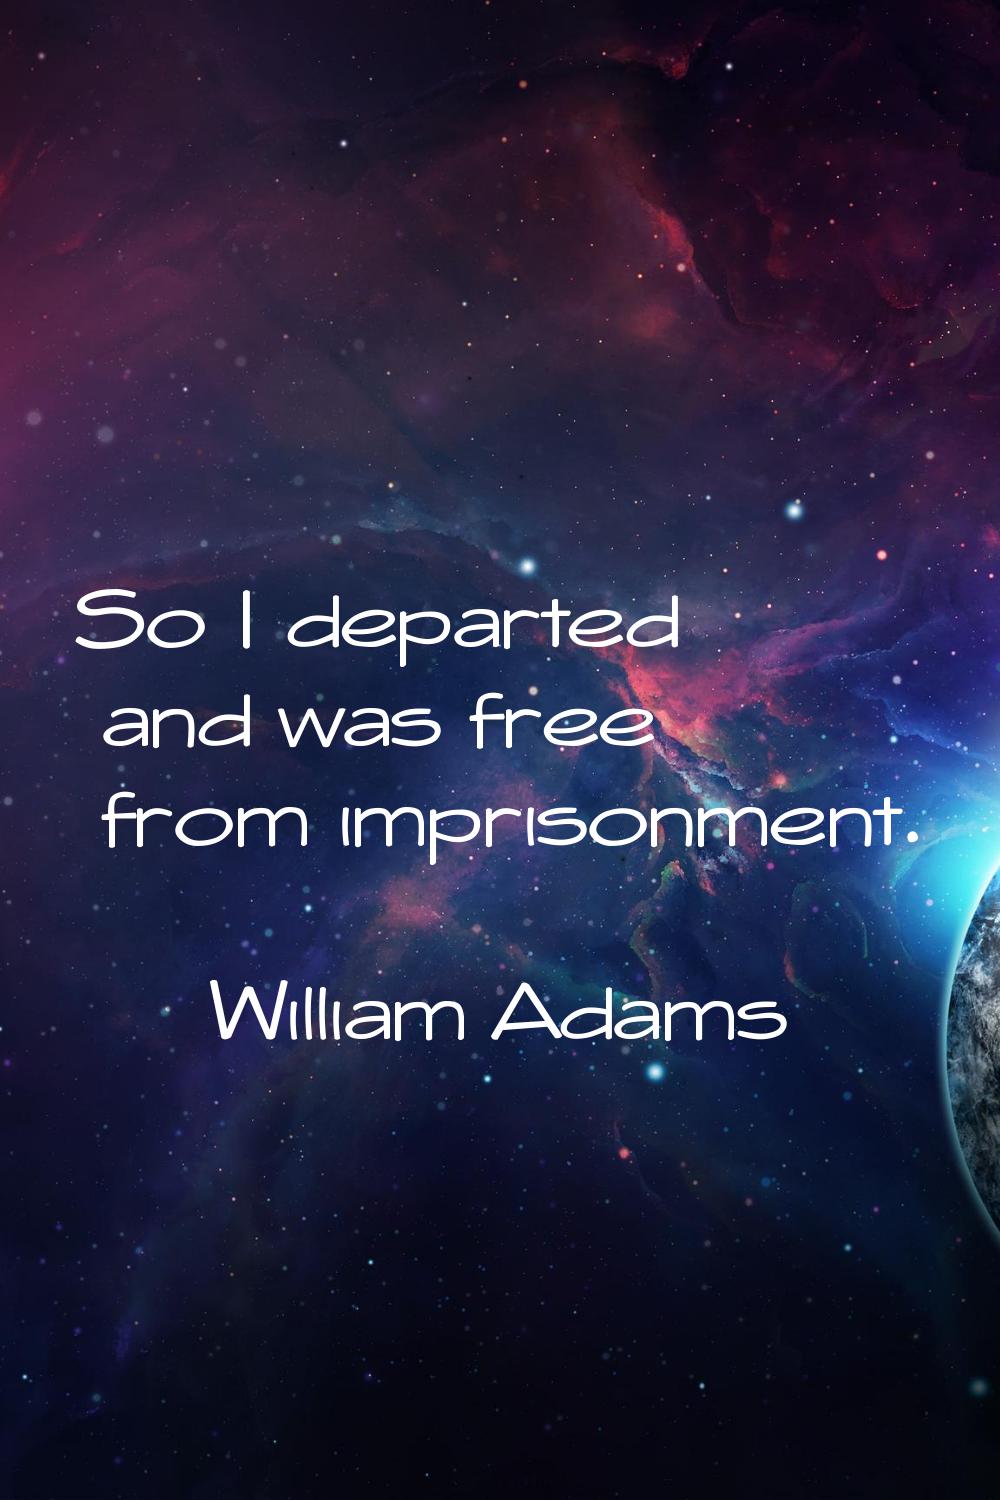 So I departed and was free from imprisonment.